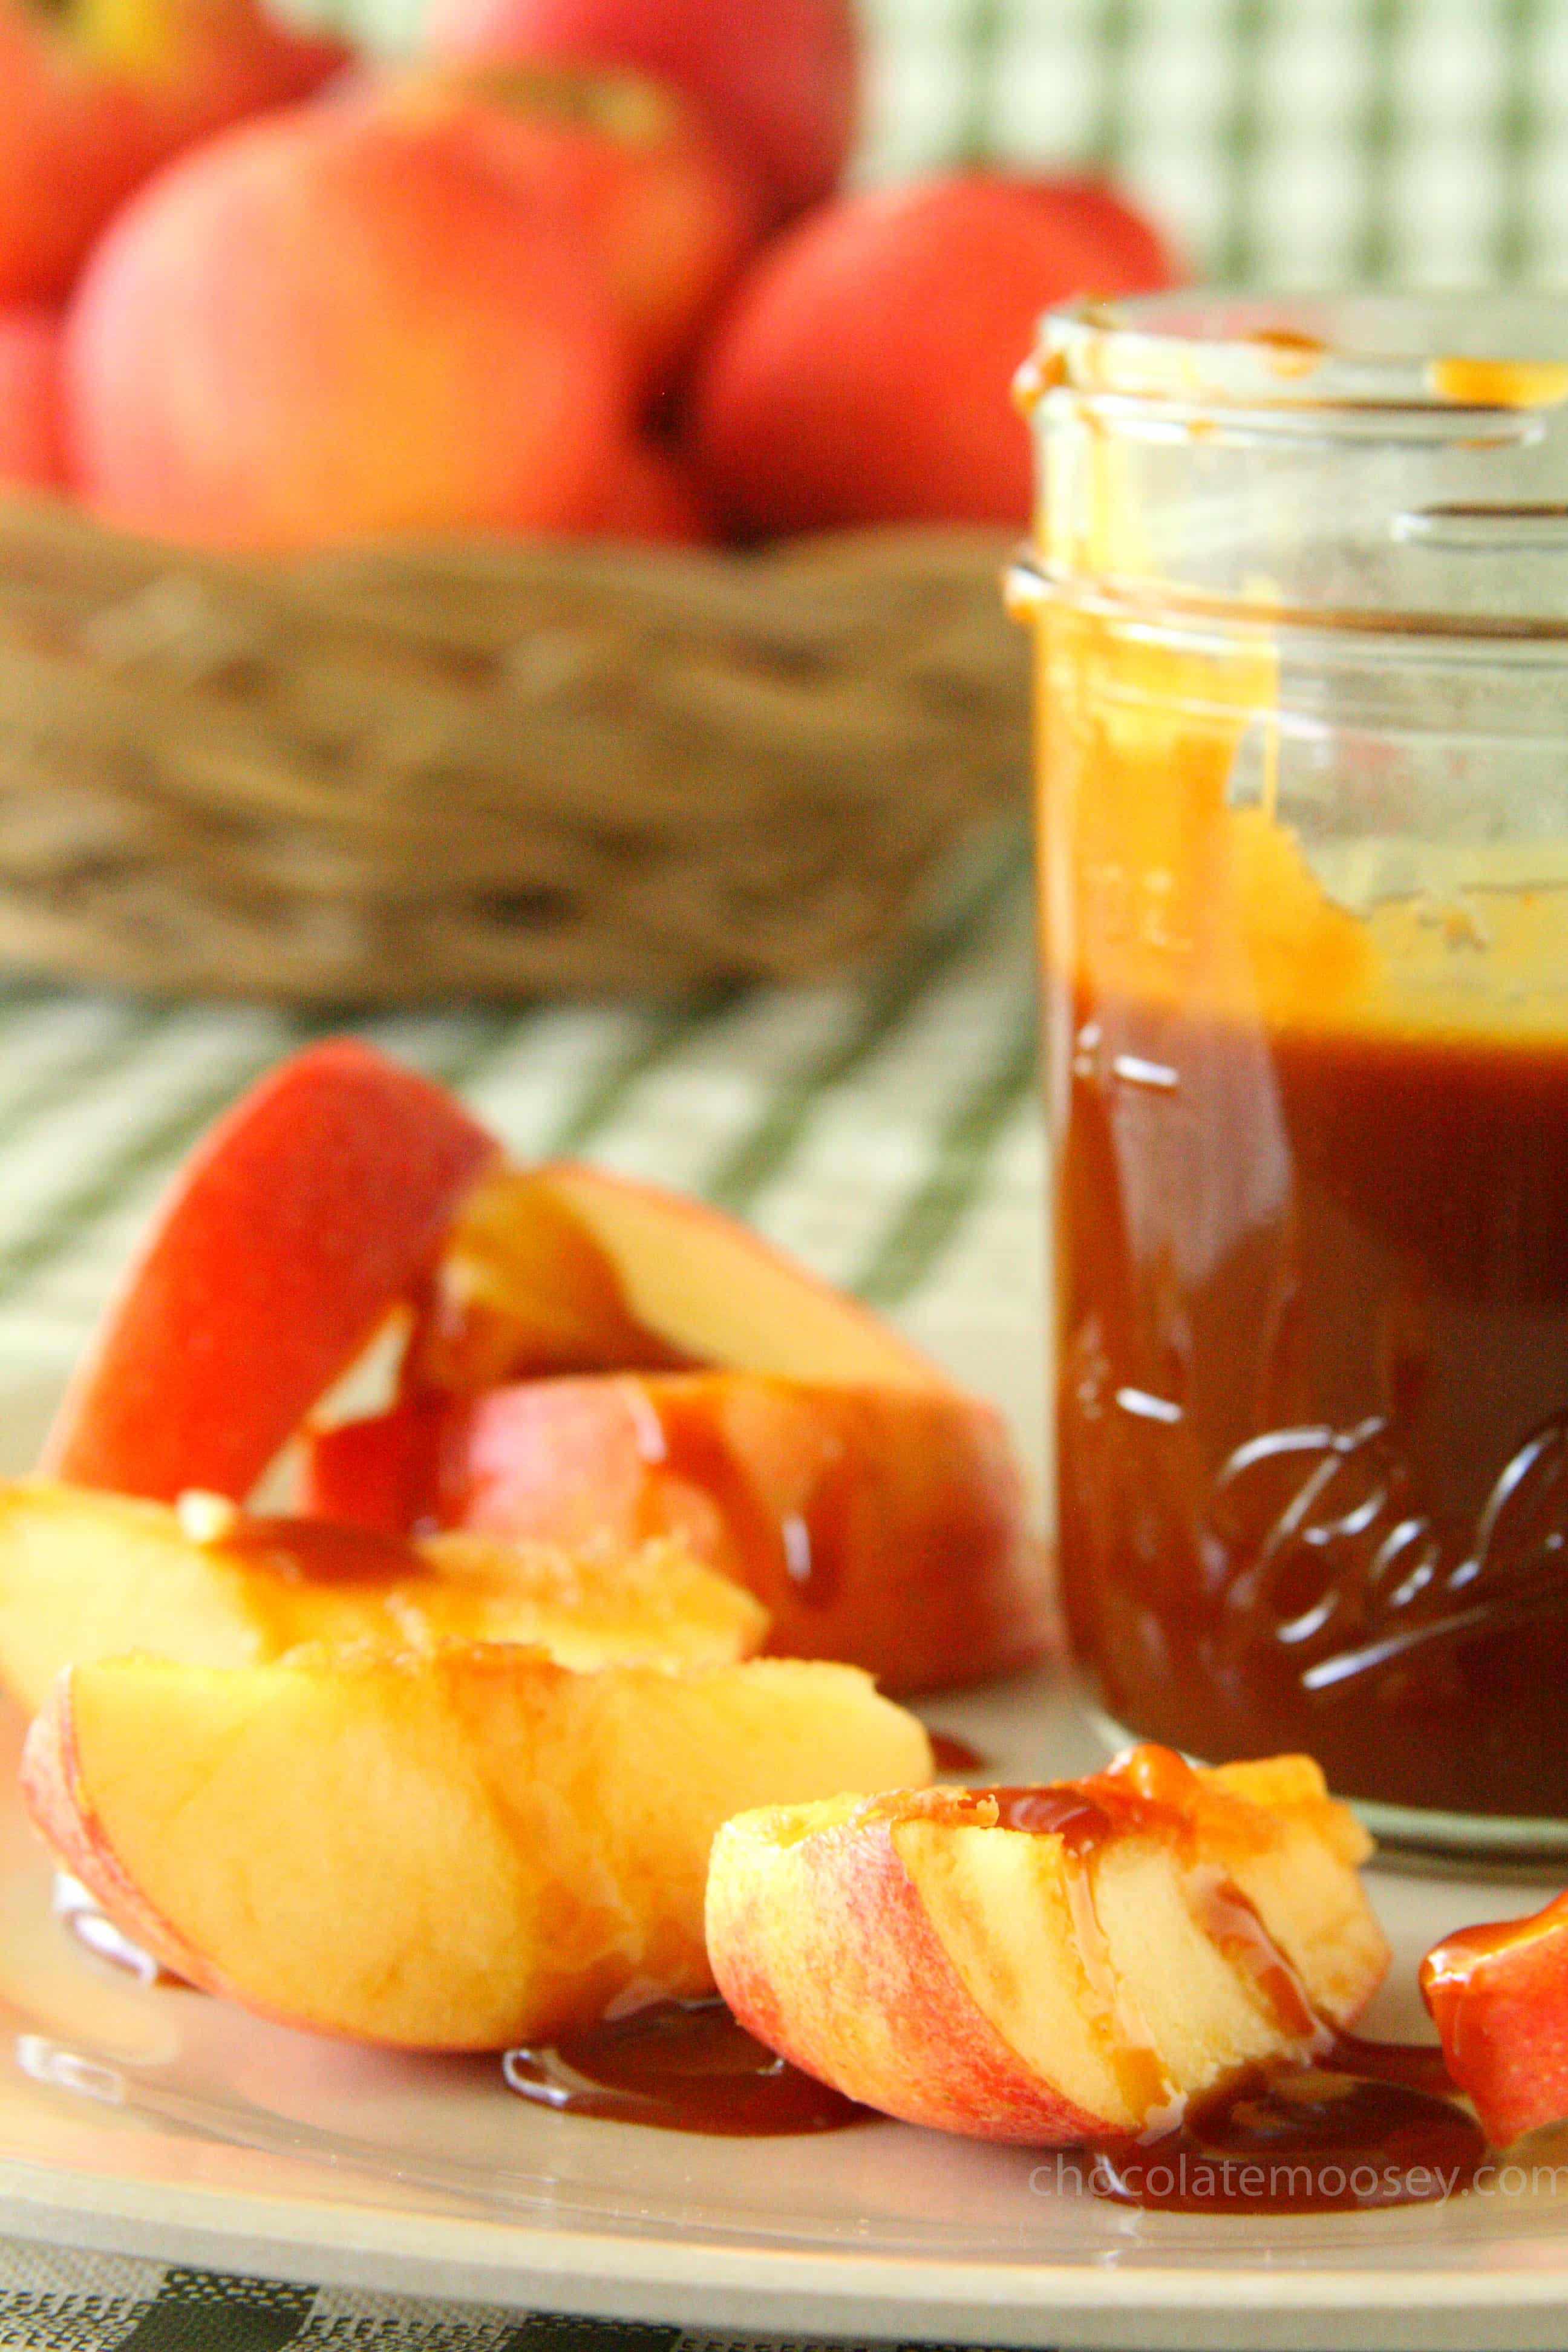 Apples drizzled with caramel sauce